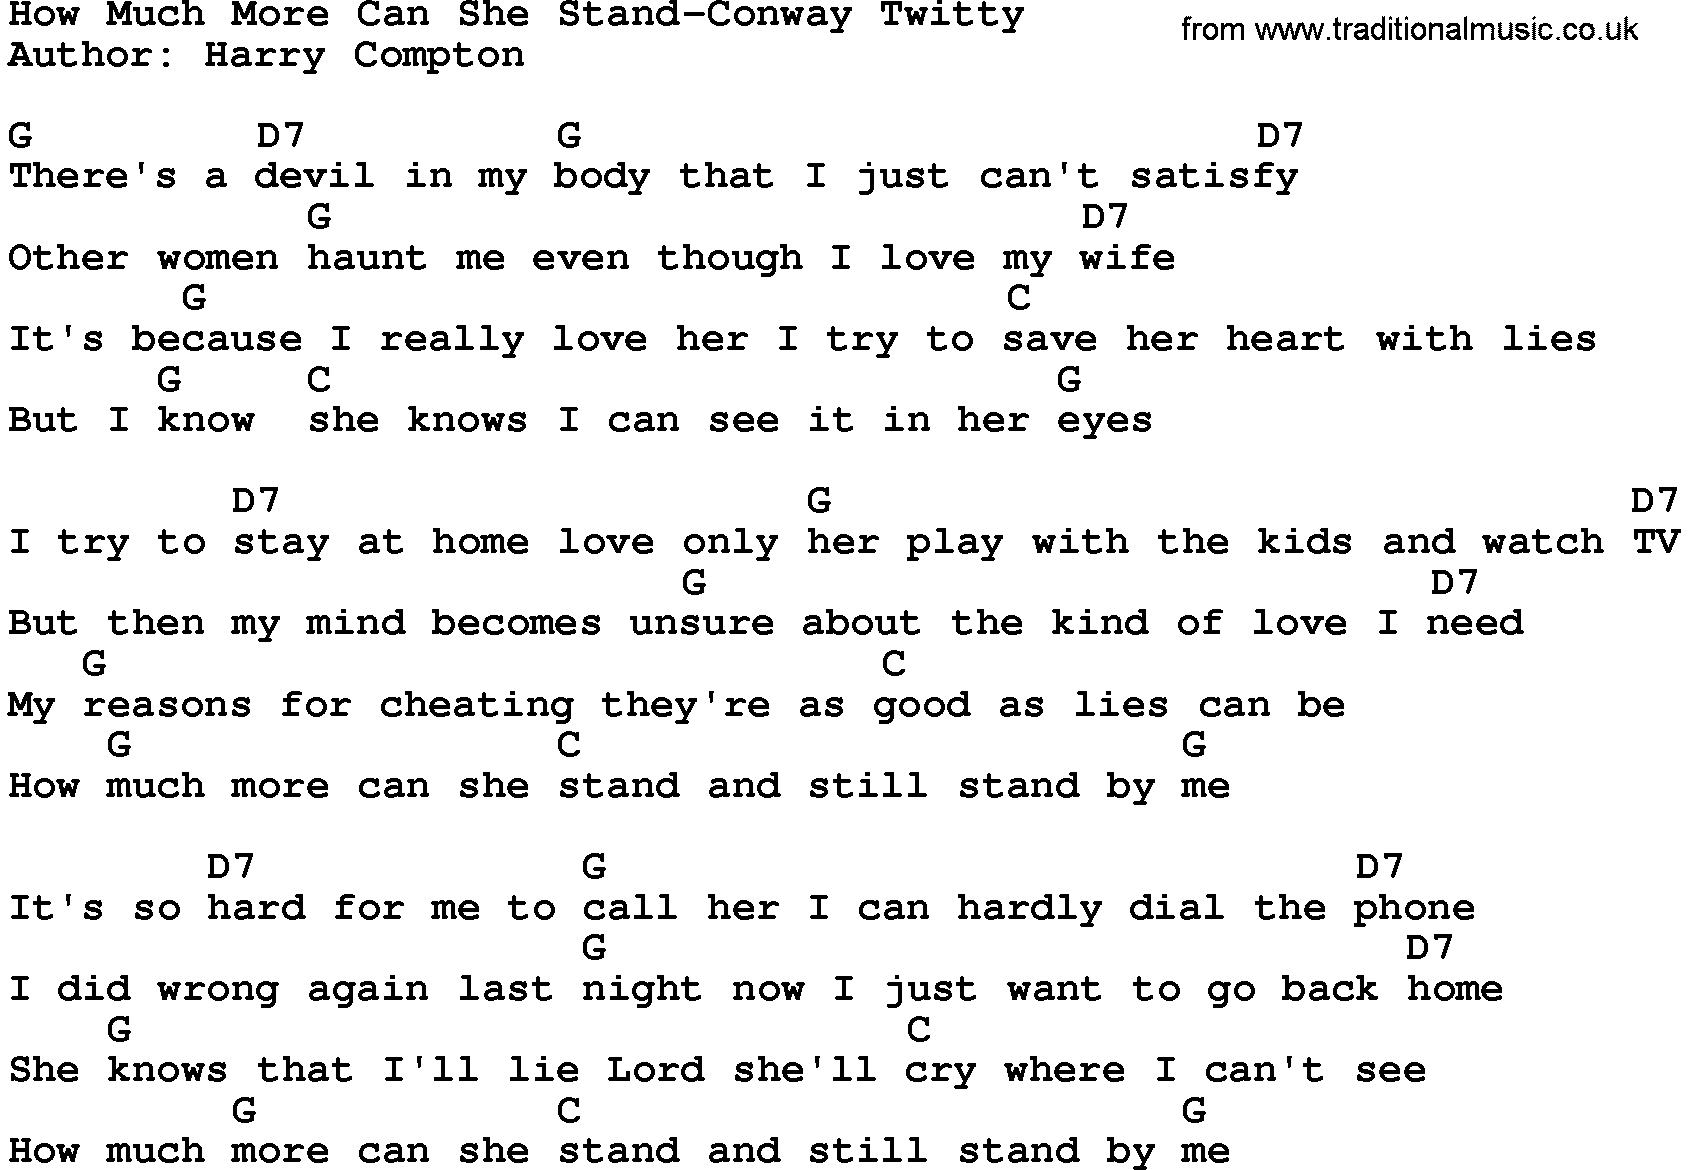 Country music song: How Much More Can She Stand-Conway Twitty lyrics and chords